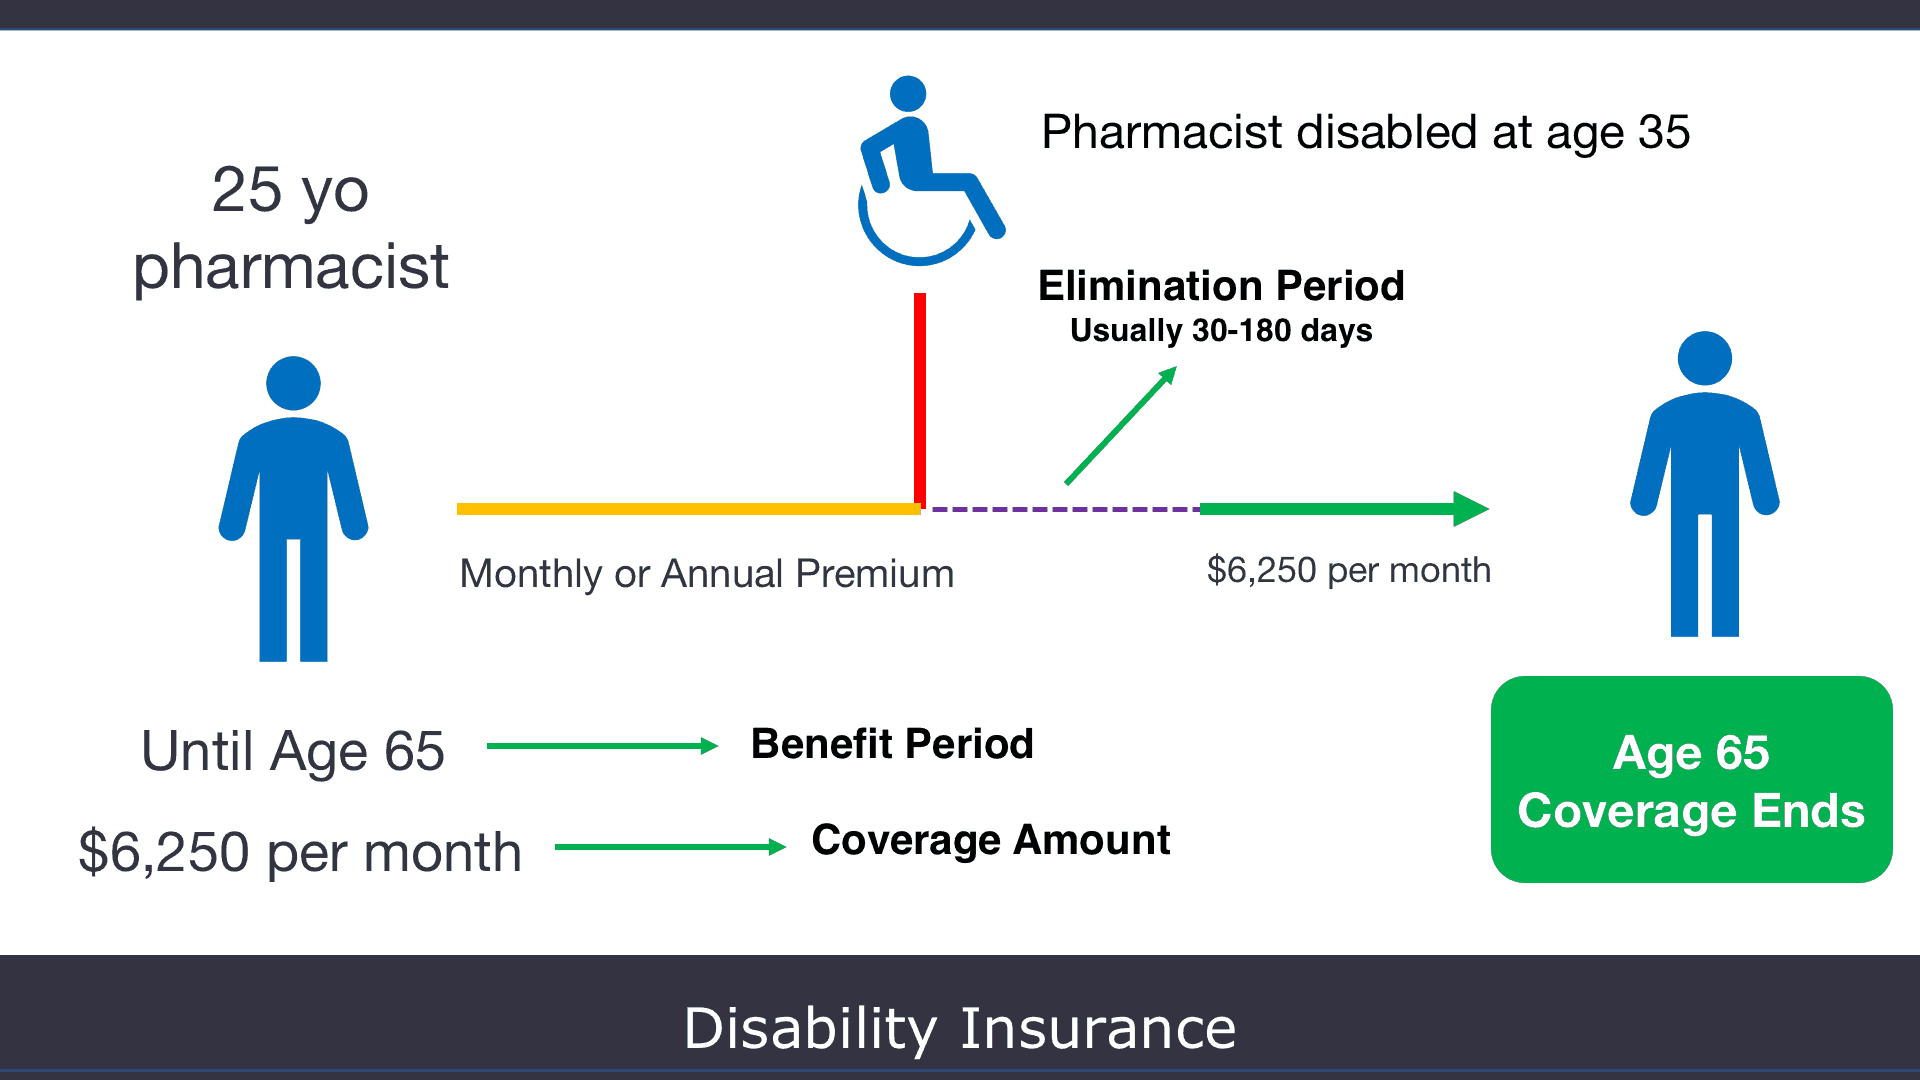 long term disability insurance for pharmacists, pharmacist disability insurance